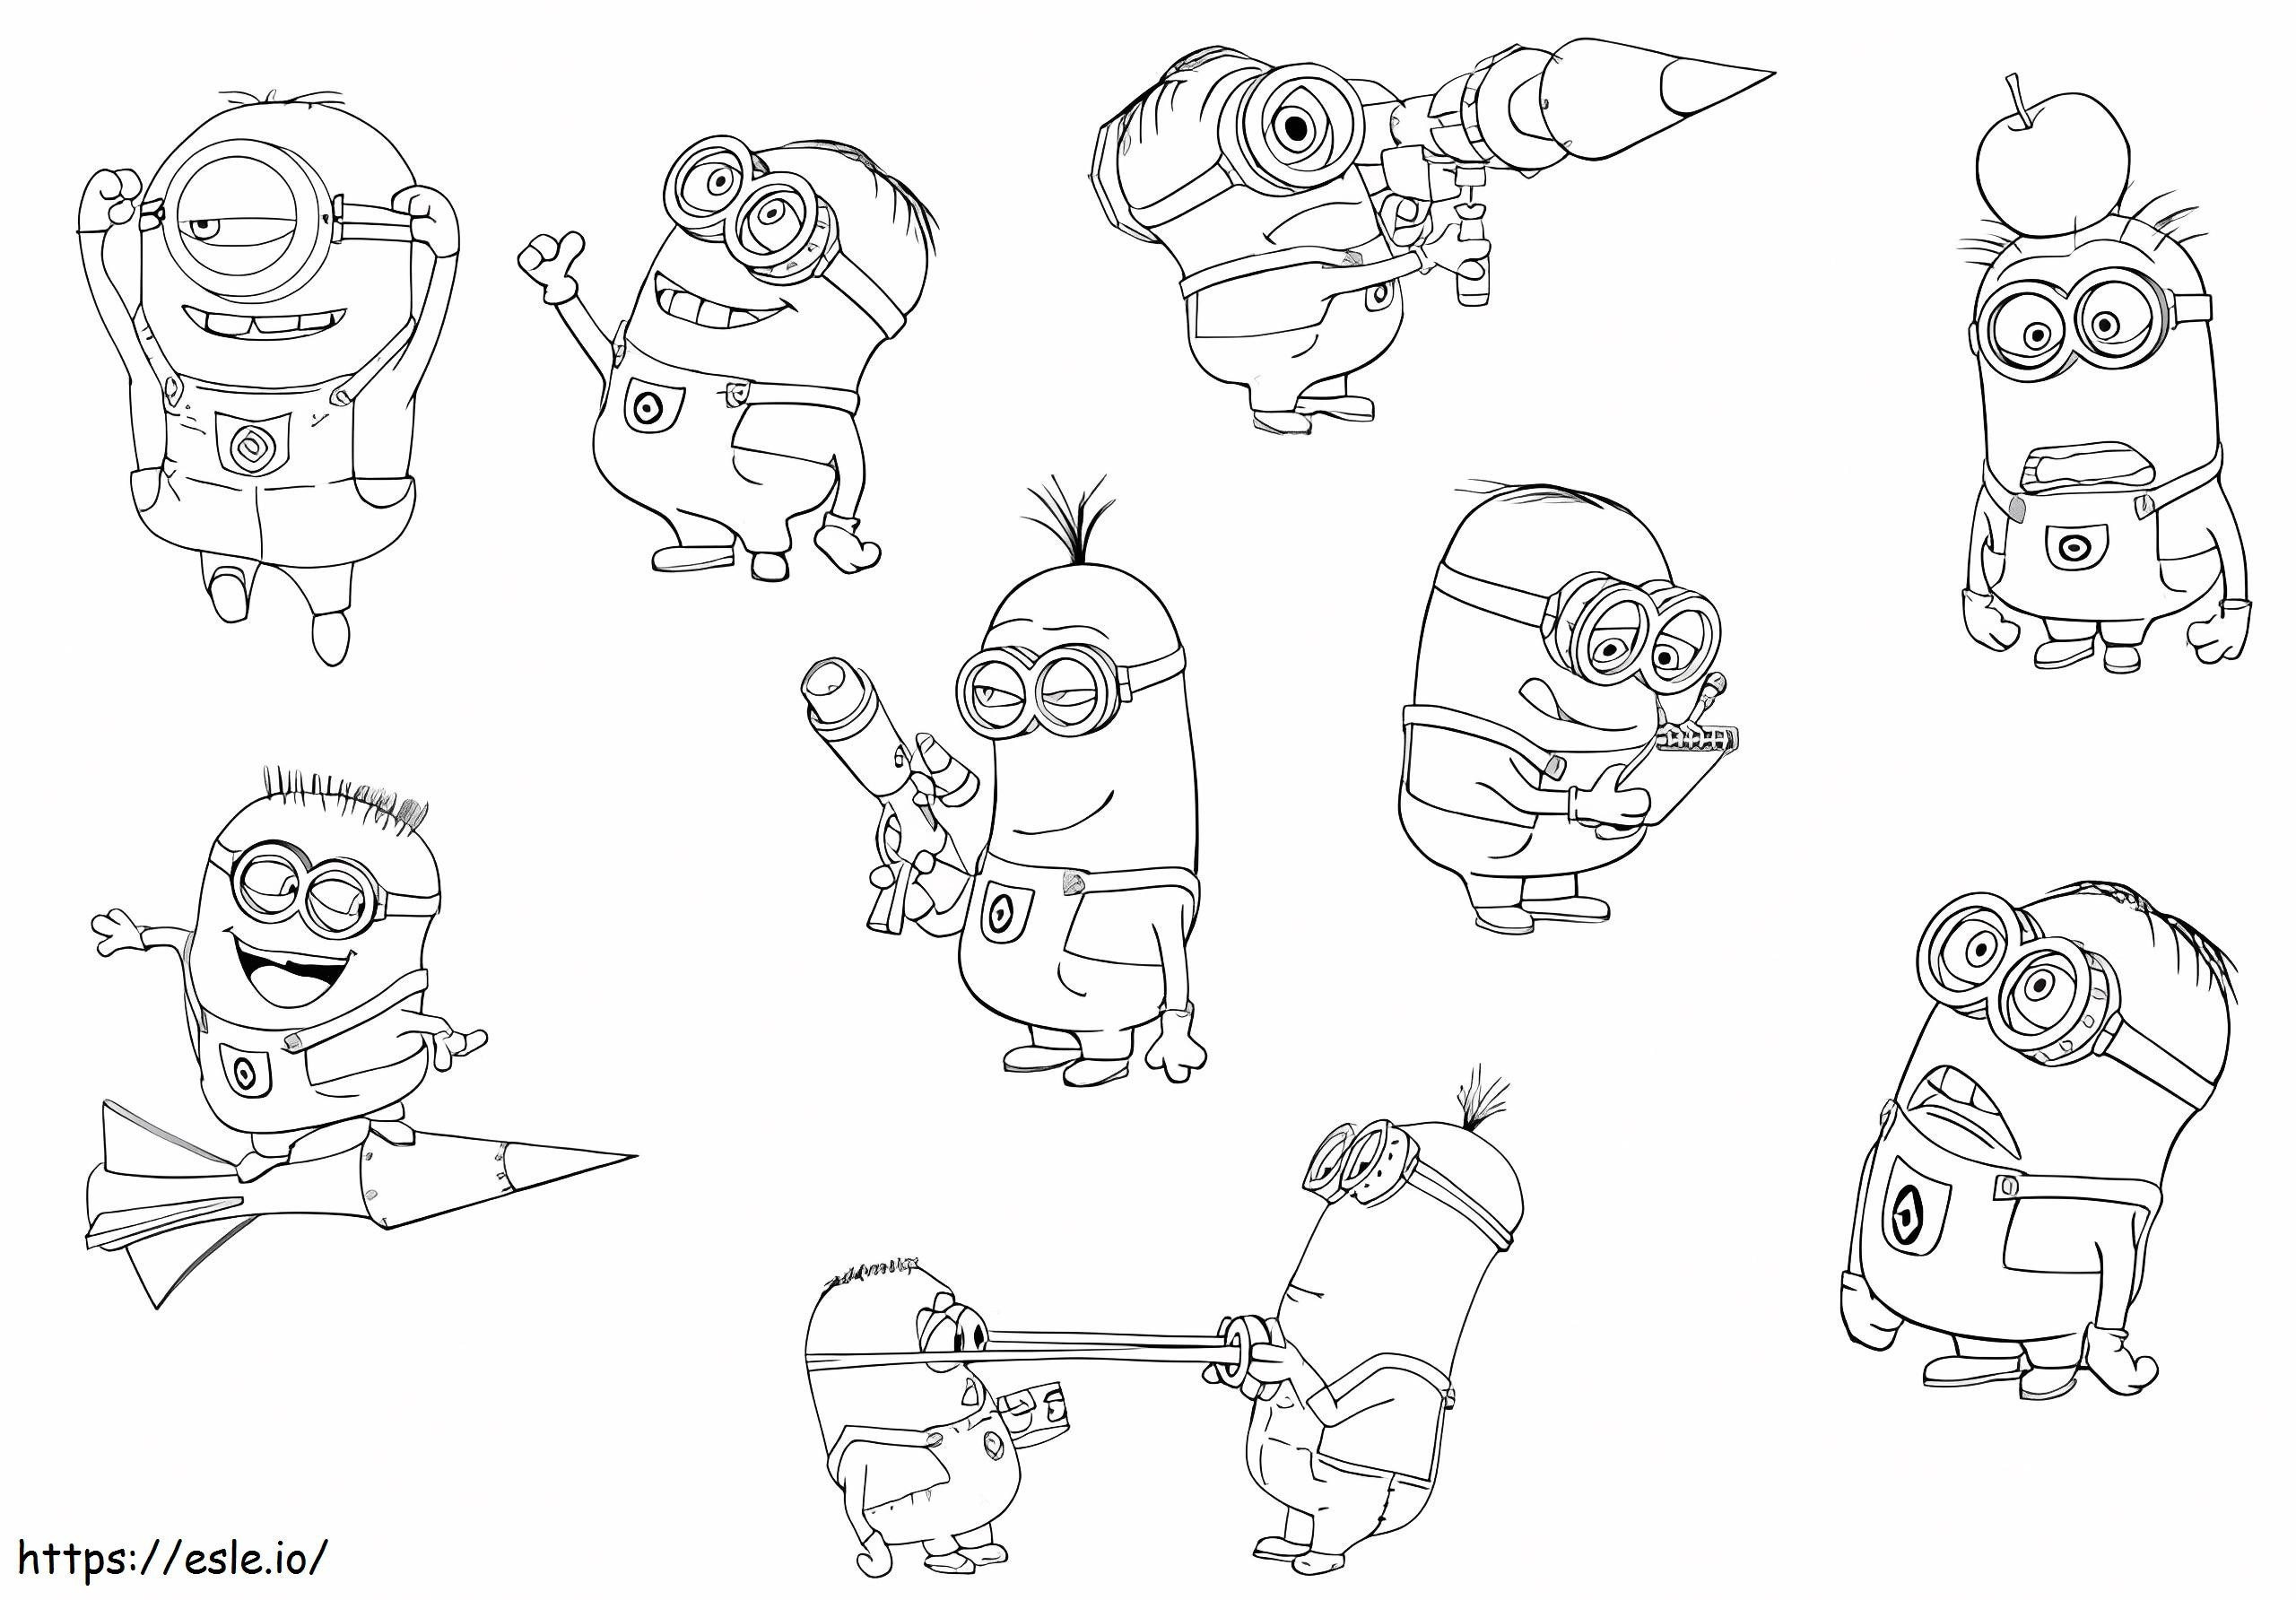 Basic Minions coloring page